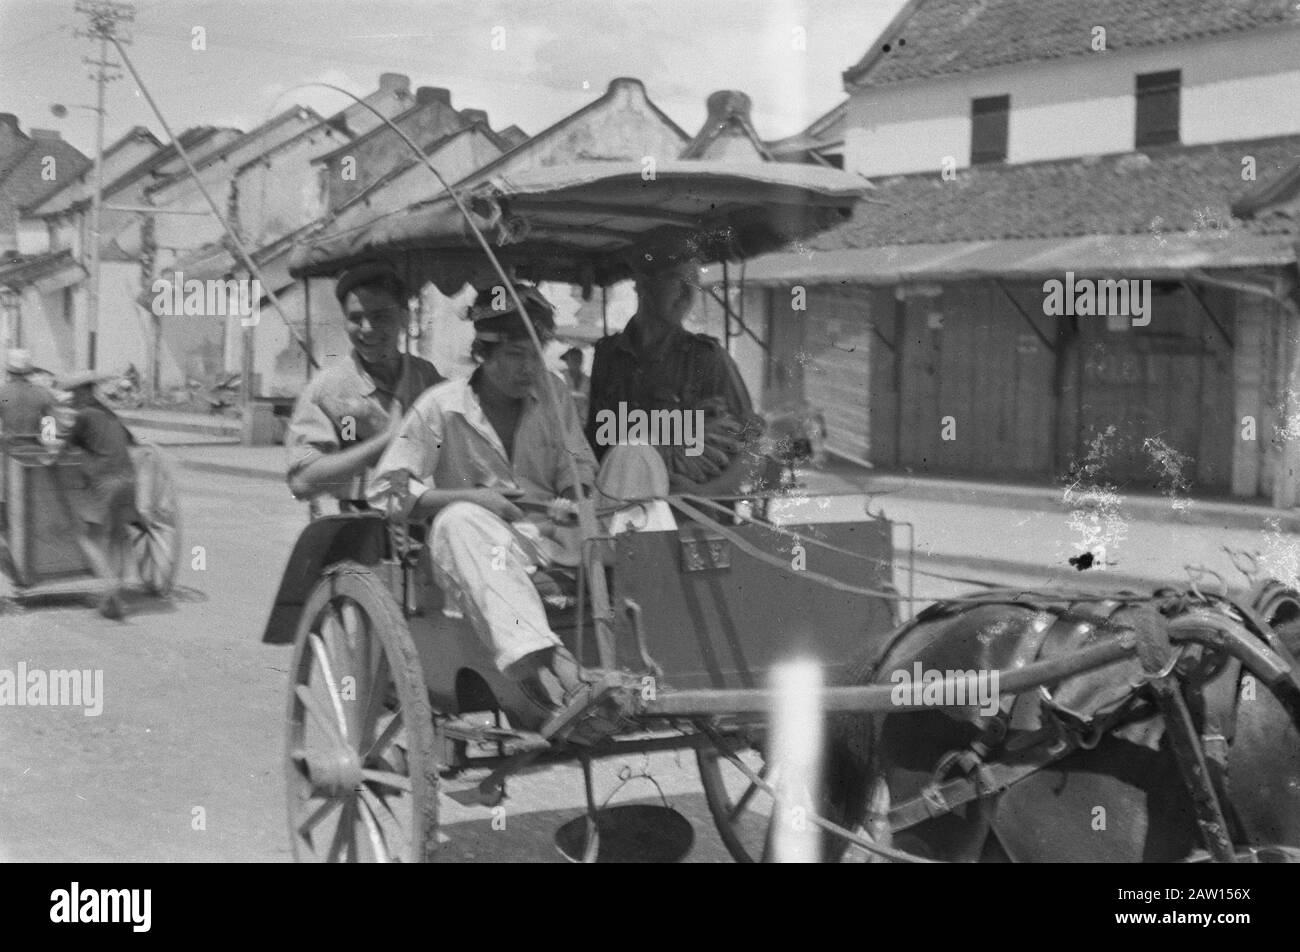 Salatiga providing clothing and passarbeeld  Also in Salatiga, life returned to normal jobs and will be purchased on the pasars and acted. The soldiers are of course the best customers. In dokar Annotation: In the background ruined buildings Date: August 31, 1947 Location: Indonesia Dutch East Indies Stock Photo